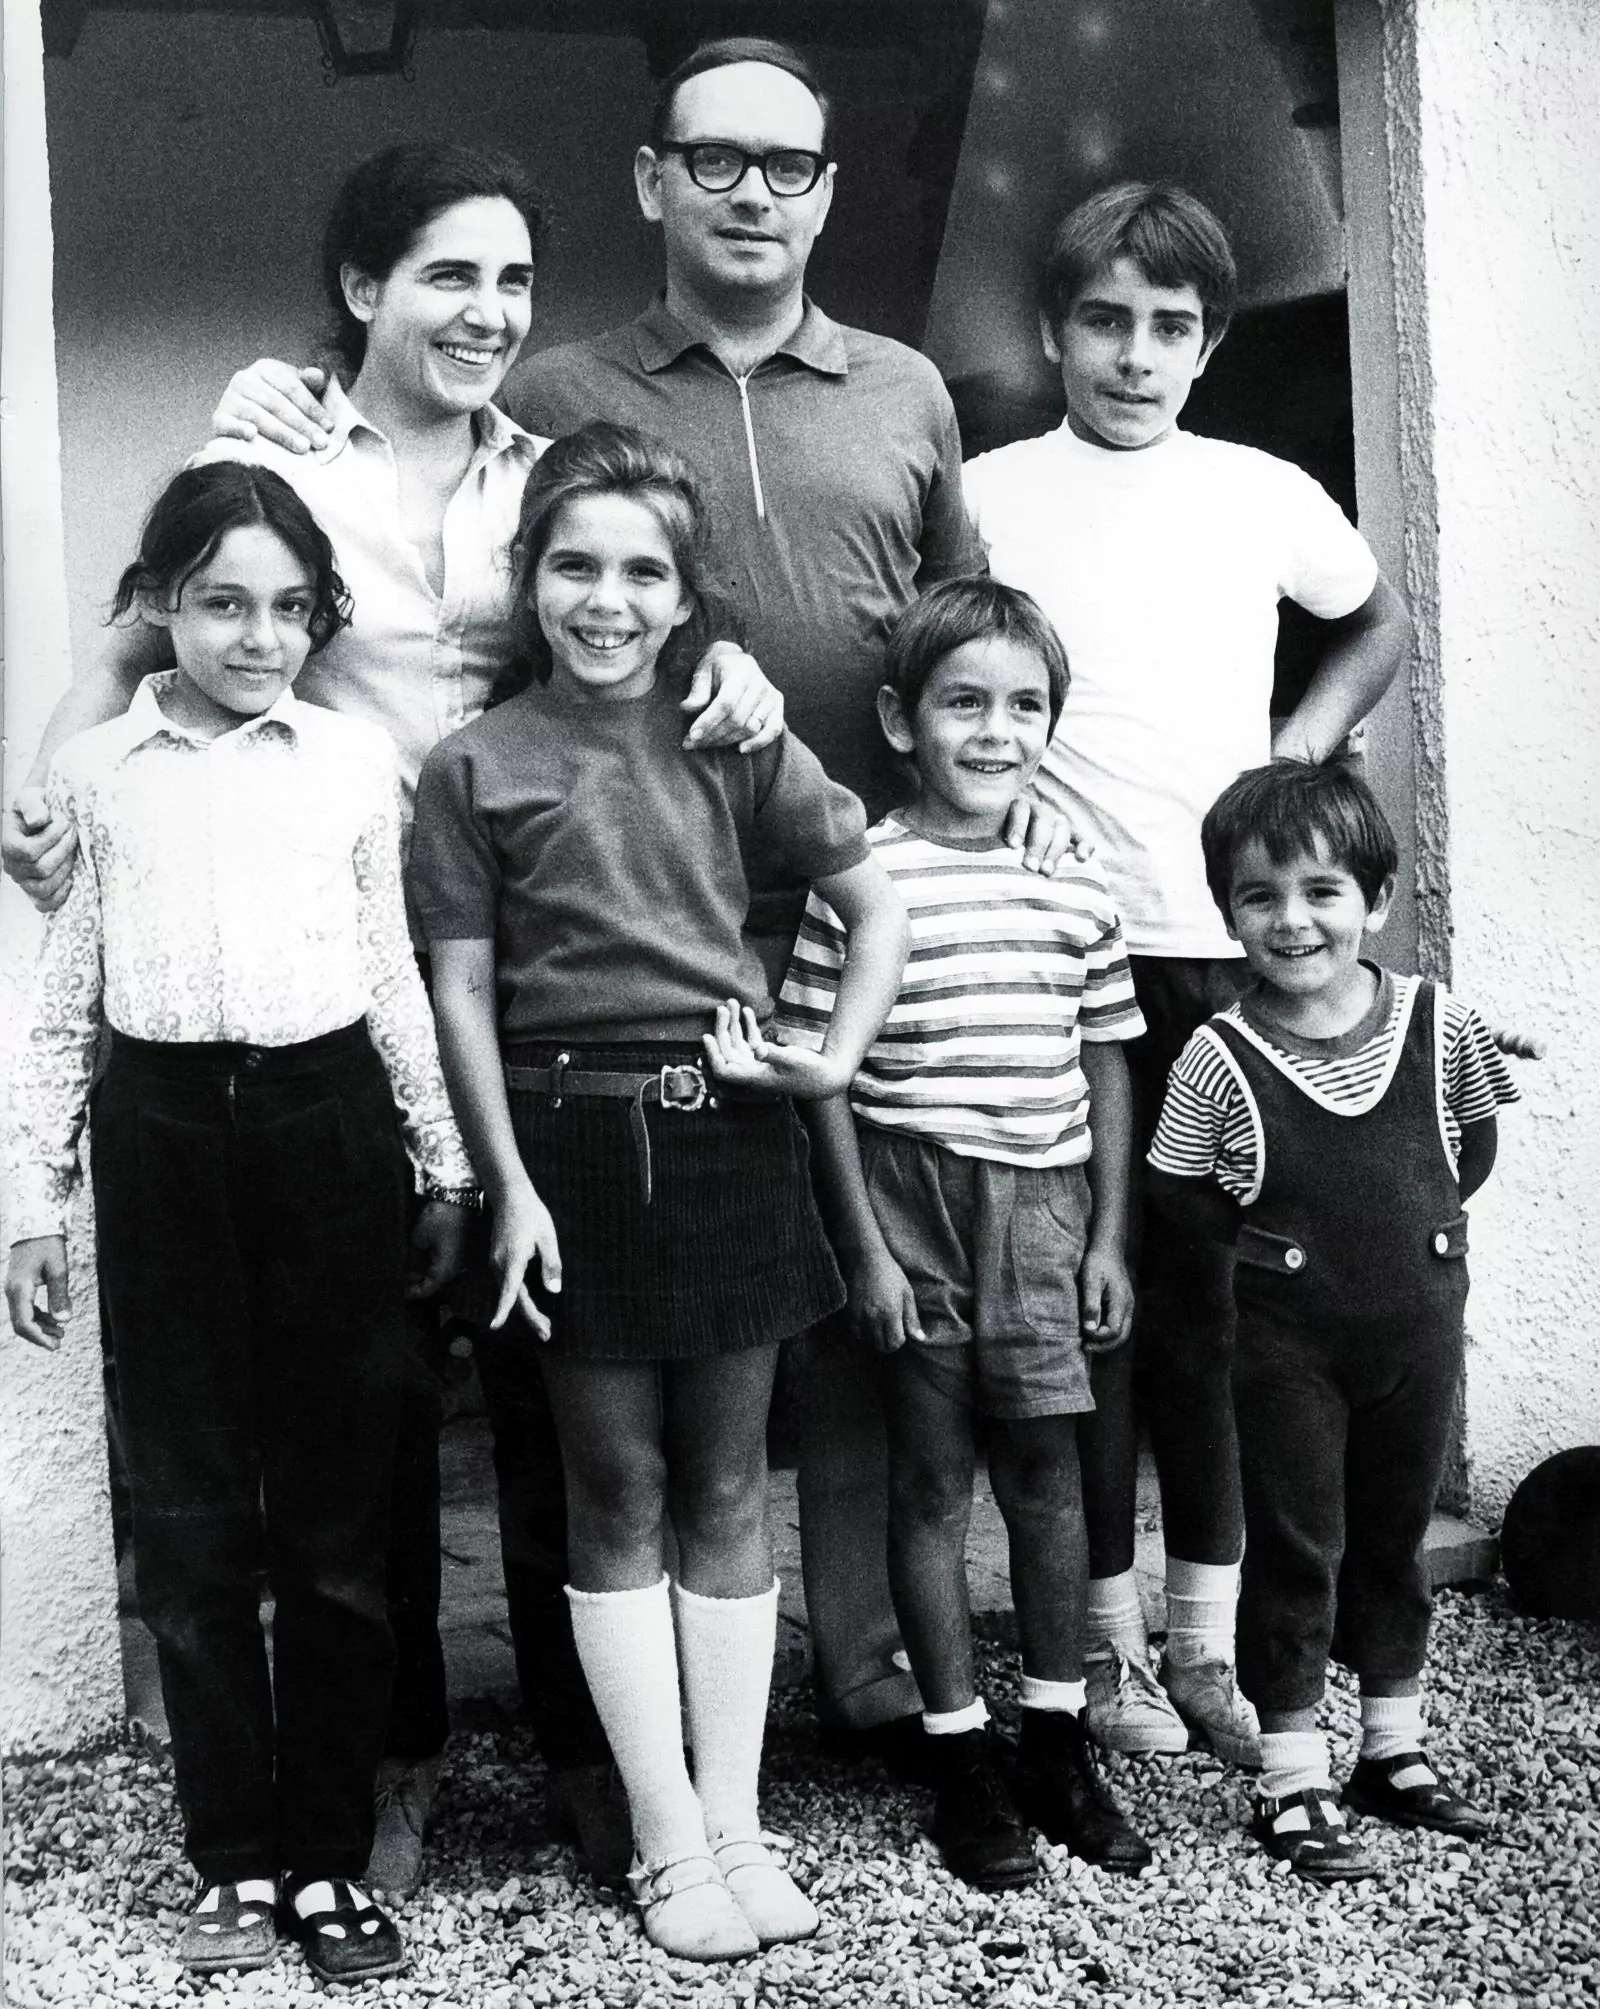 Ennio Morricone with his wife Maria Travia, sons Marco, Andrea, Giovanni, daughter Alessandra and niece Laura, Rome, 1970.